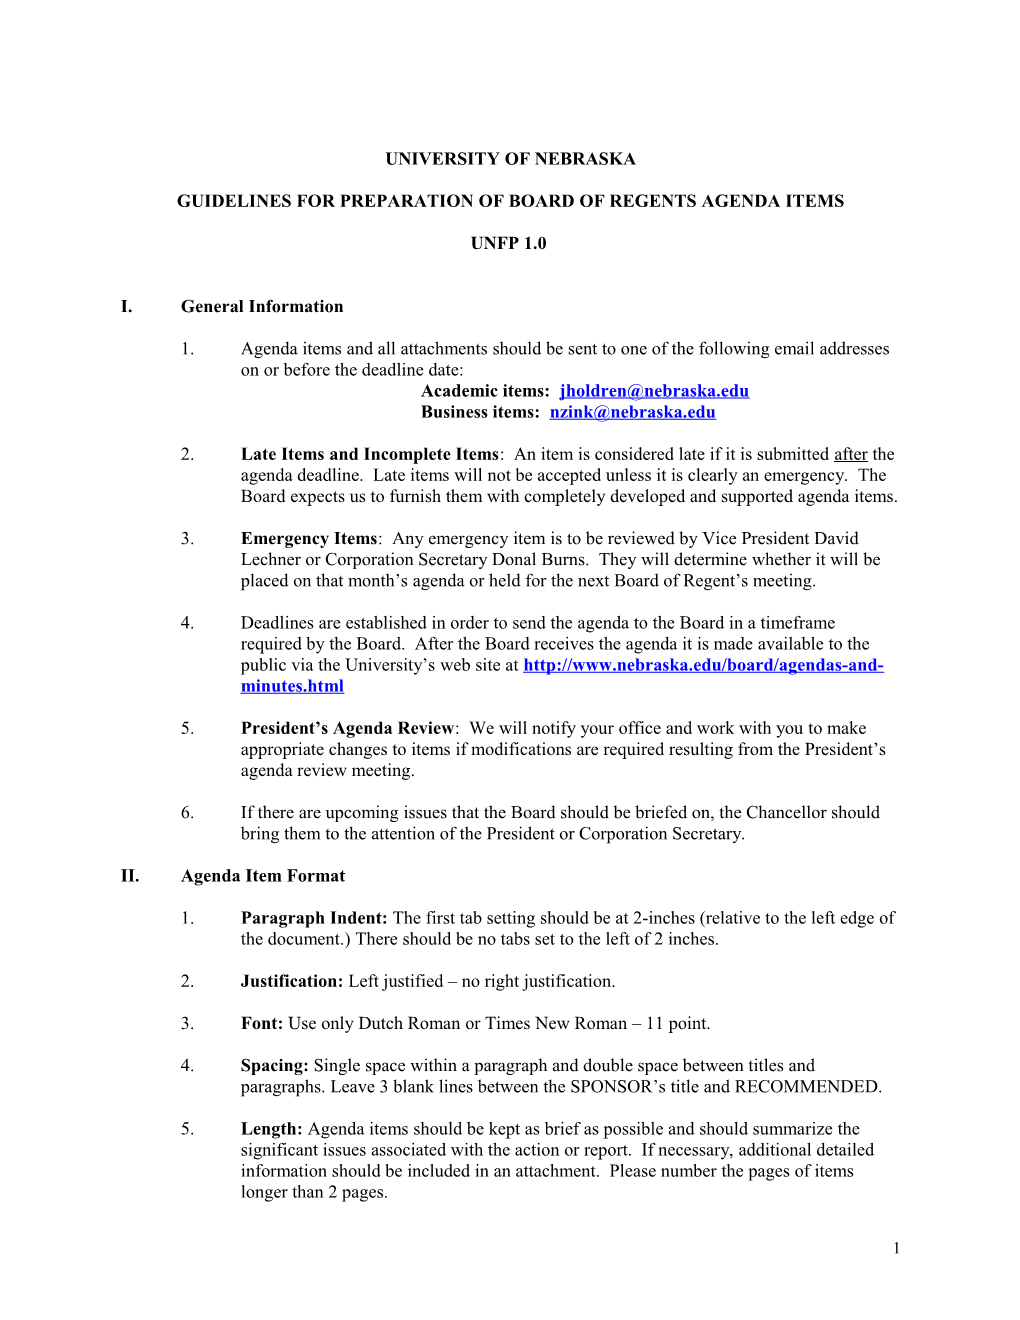 Guidelines for Preparation of Board of Regents Agenda Items